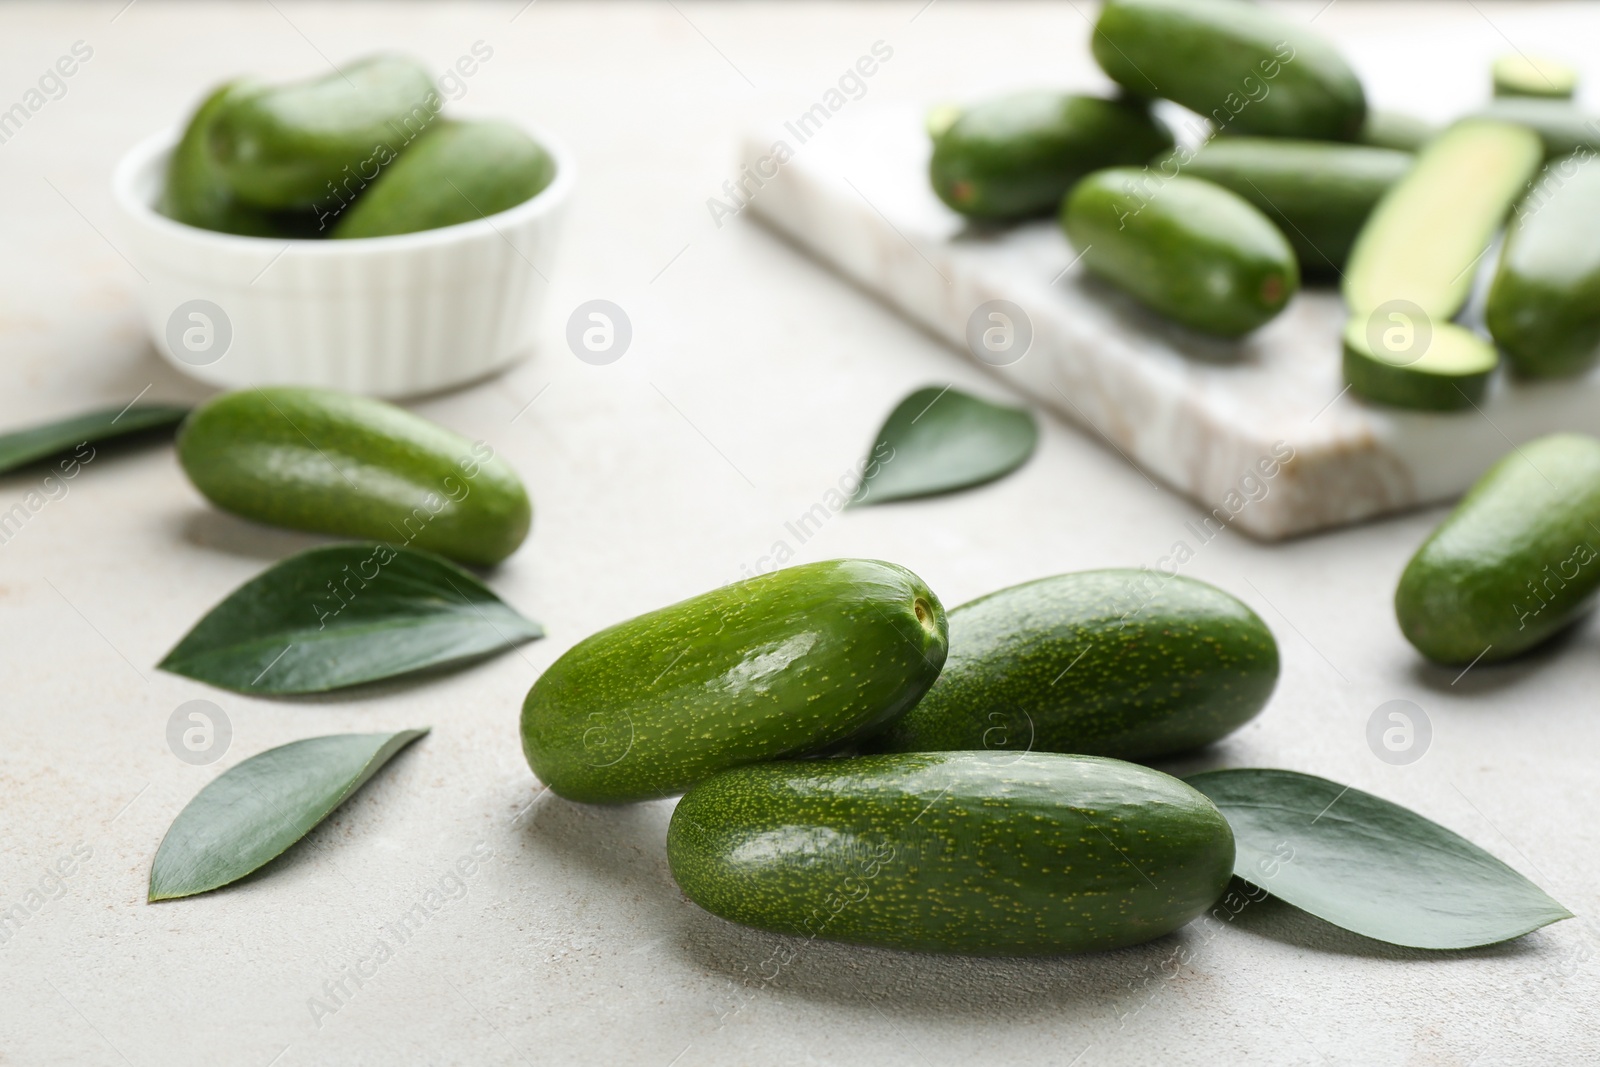 Photo of Whole seedless avocados with green leaves on light grey table